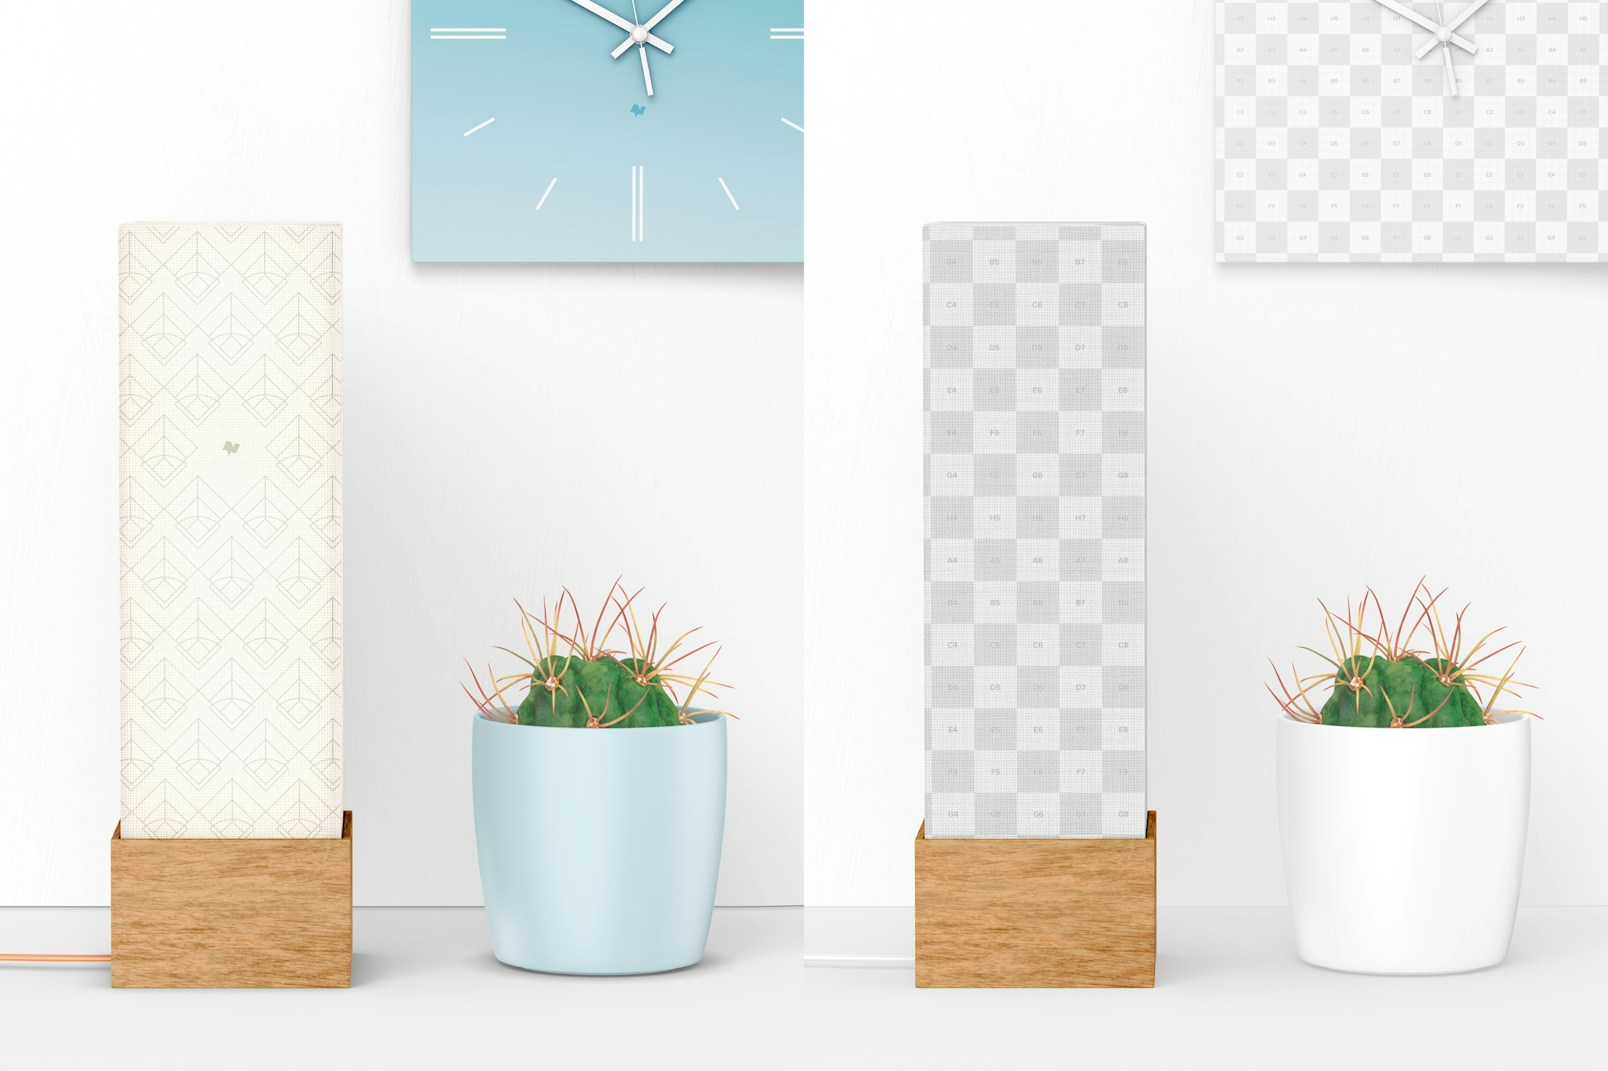 Square Wood Table Lamp with Plant Pot Mockup